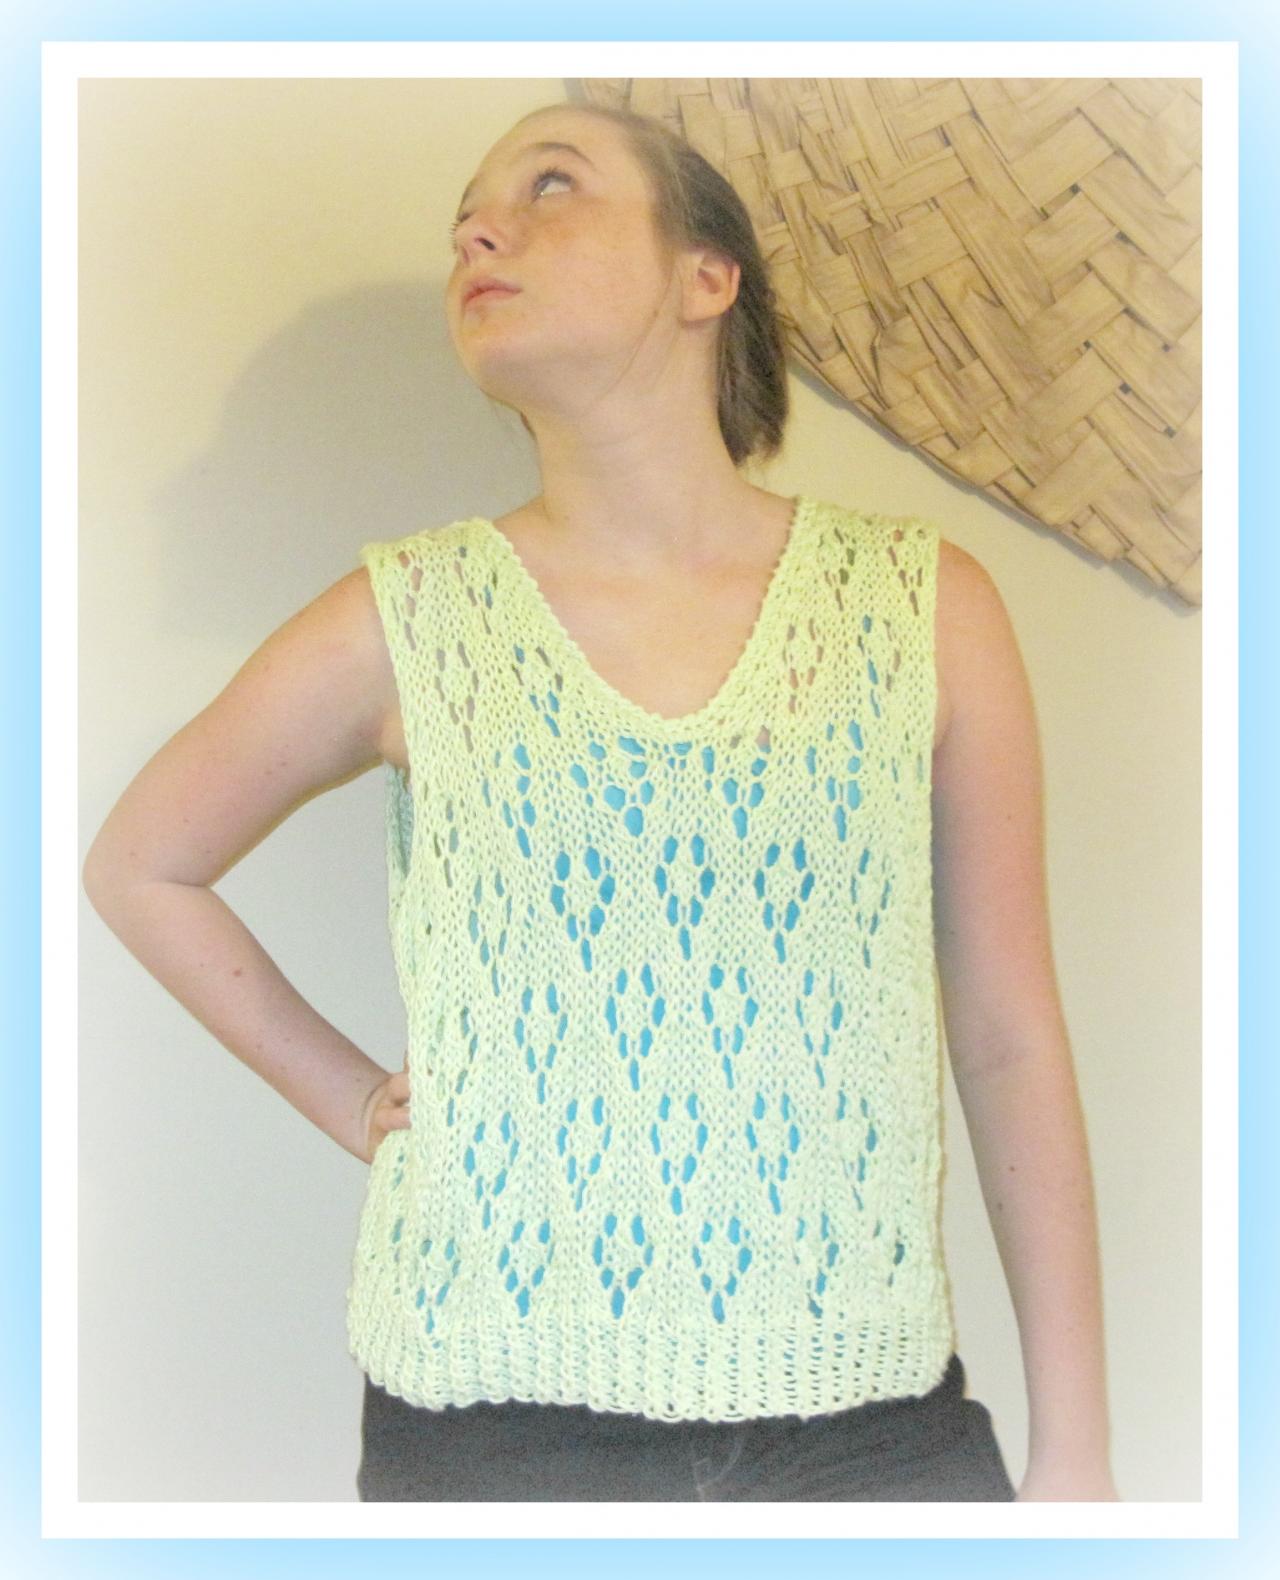 Cotton Top Diamond Pop Over Knitting Pattern Teen To Adult Xs S M L Xl